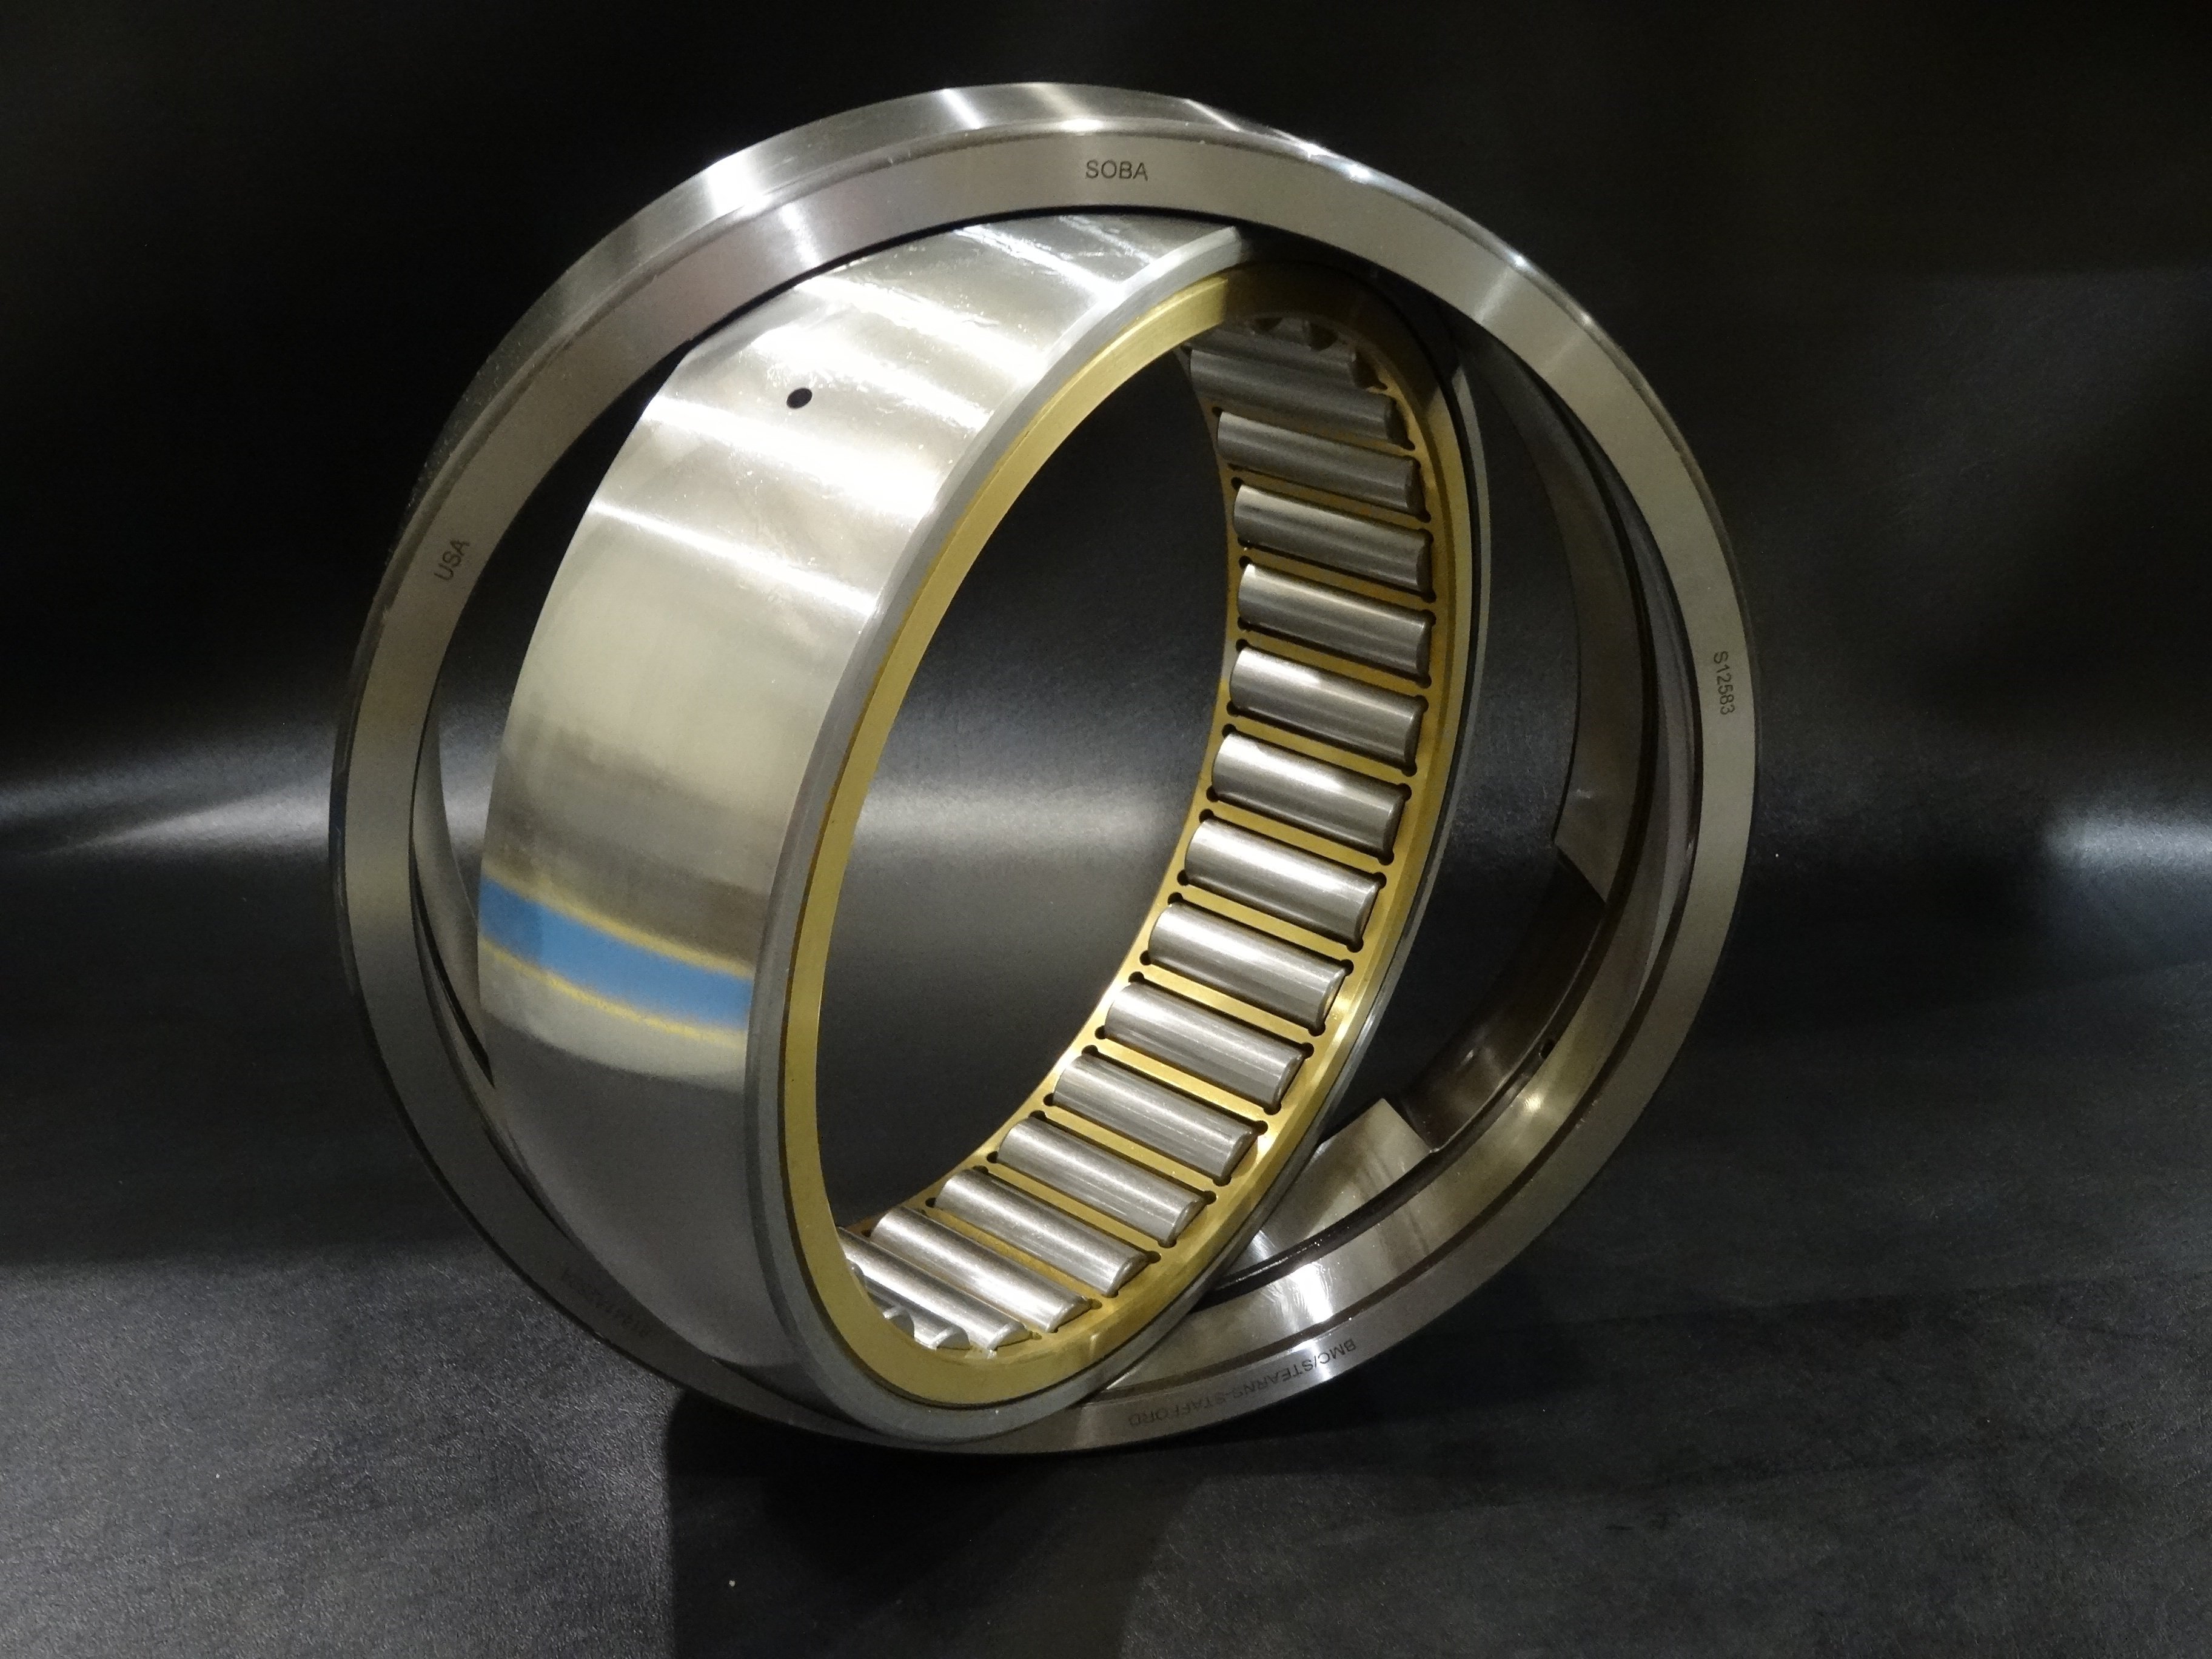 Roller Bearings: Cylindrical, Spherical, Tapered & Needle Rollers